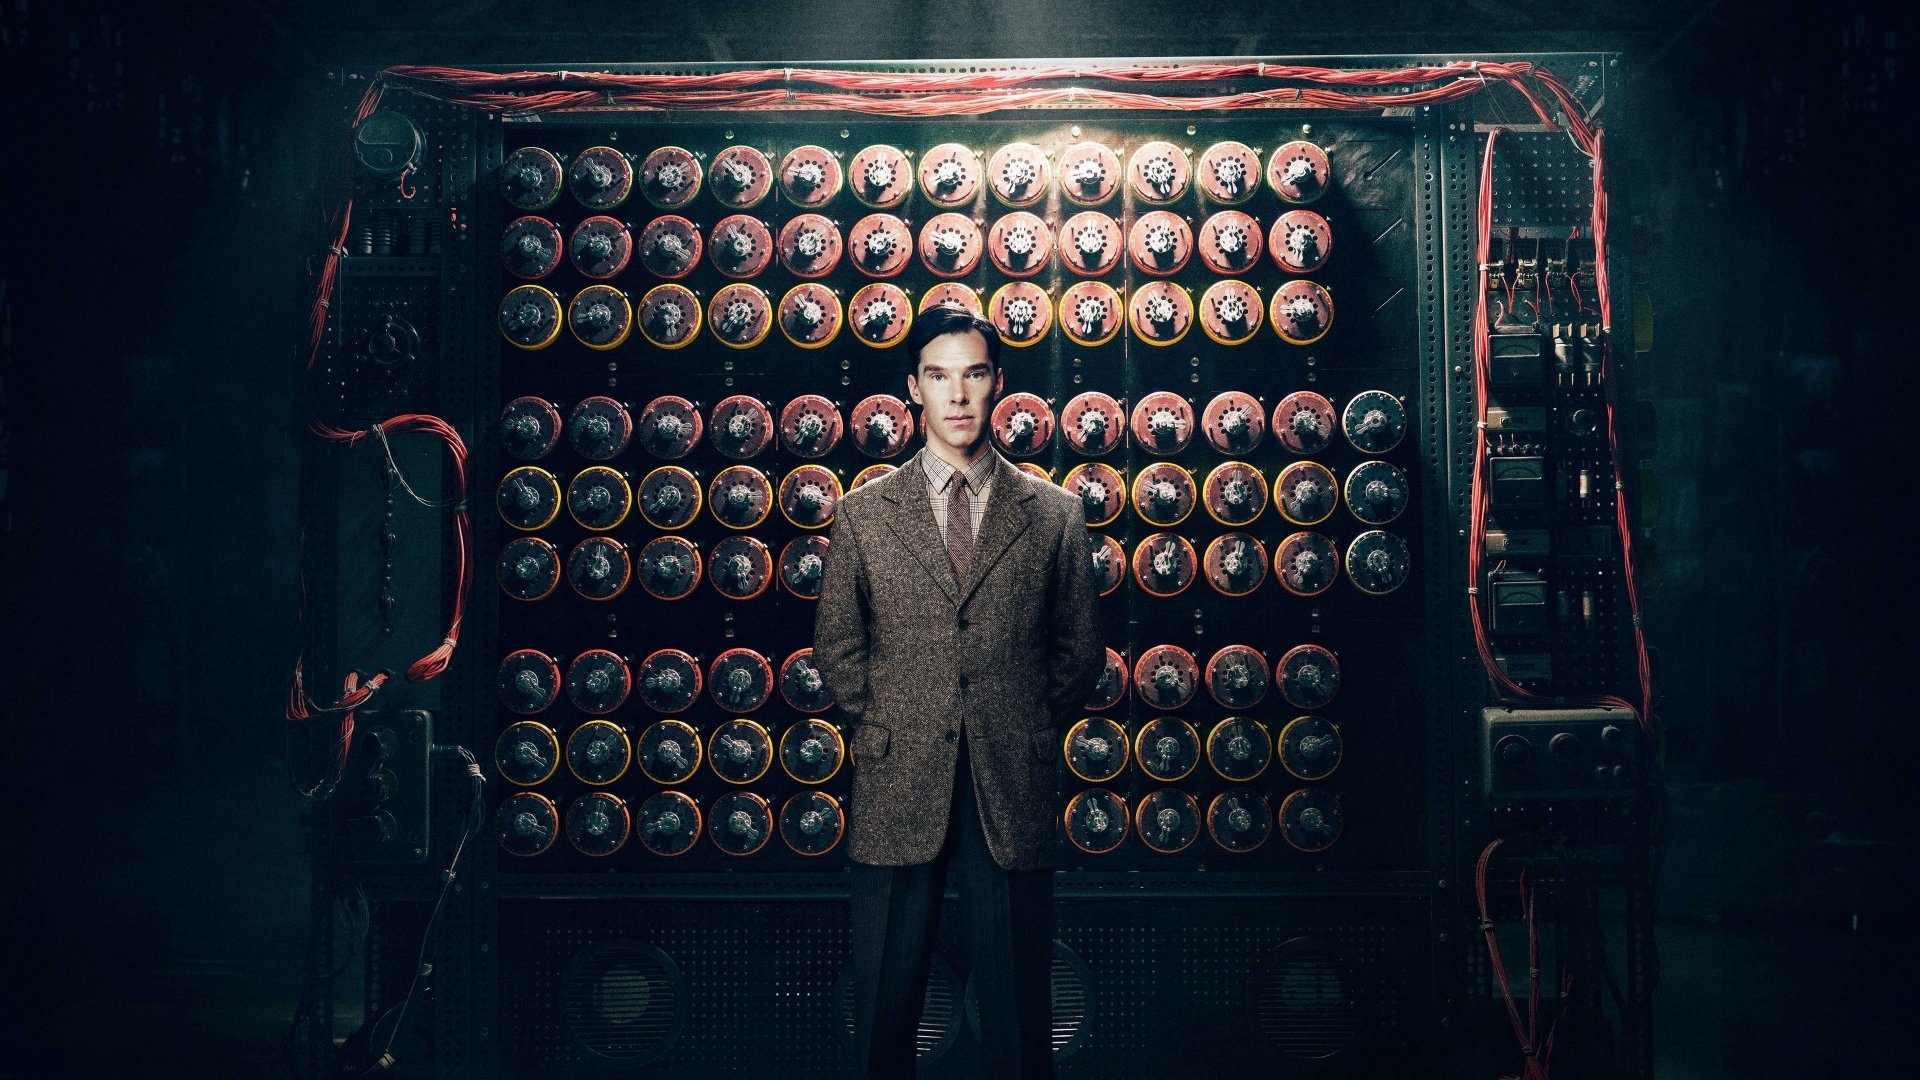 The Imitation Game: The inspiring story of mathematician Alan Turing and his team of code-breakers whose work was crucial to British efforts in World War Two. 1920x1080 Full HD Wallpaper.